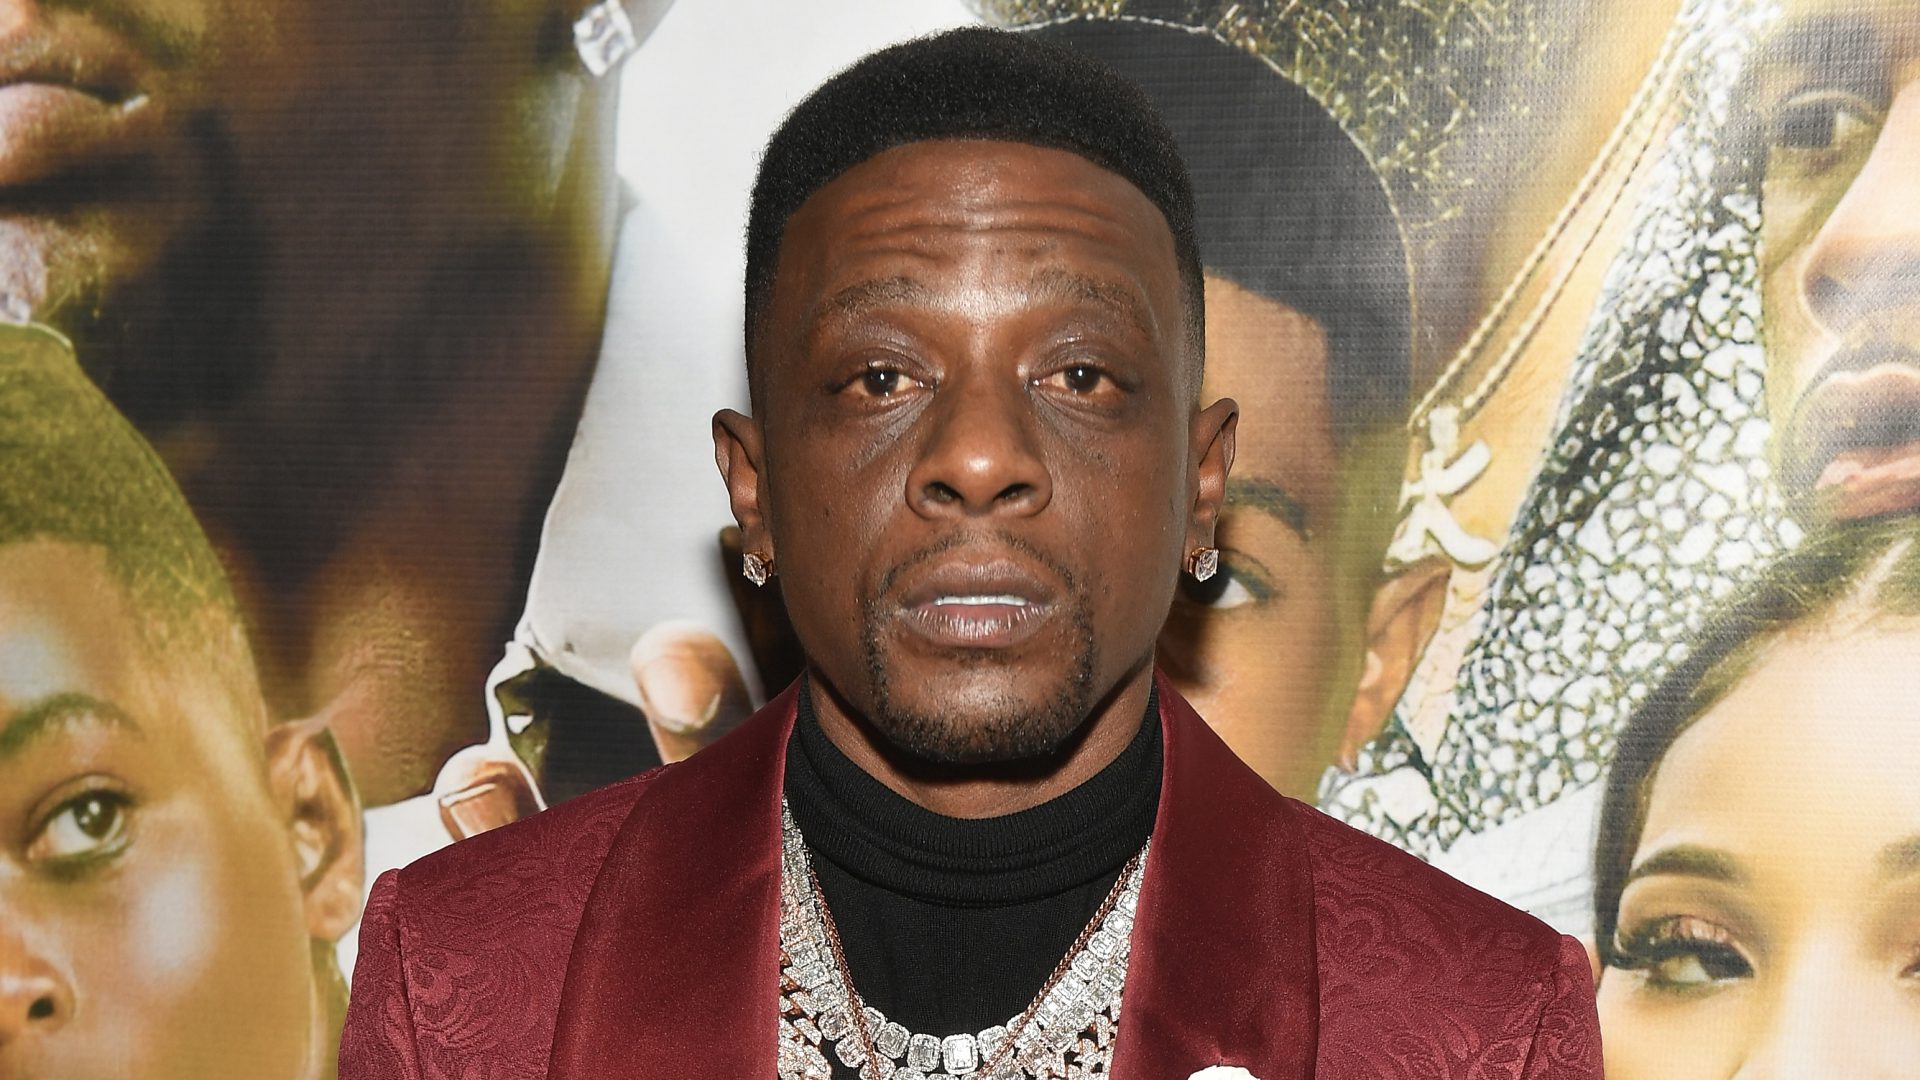 Boosie Calls For Protests After Prosecutors Deny Bond Release